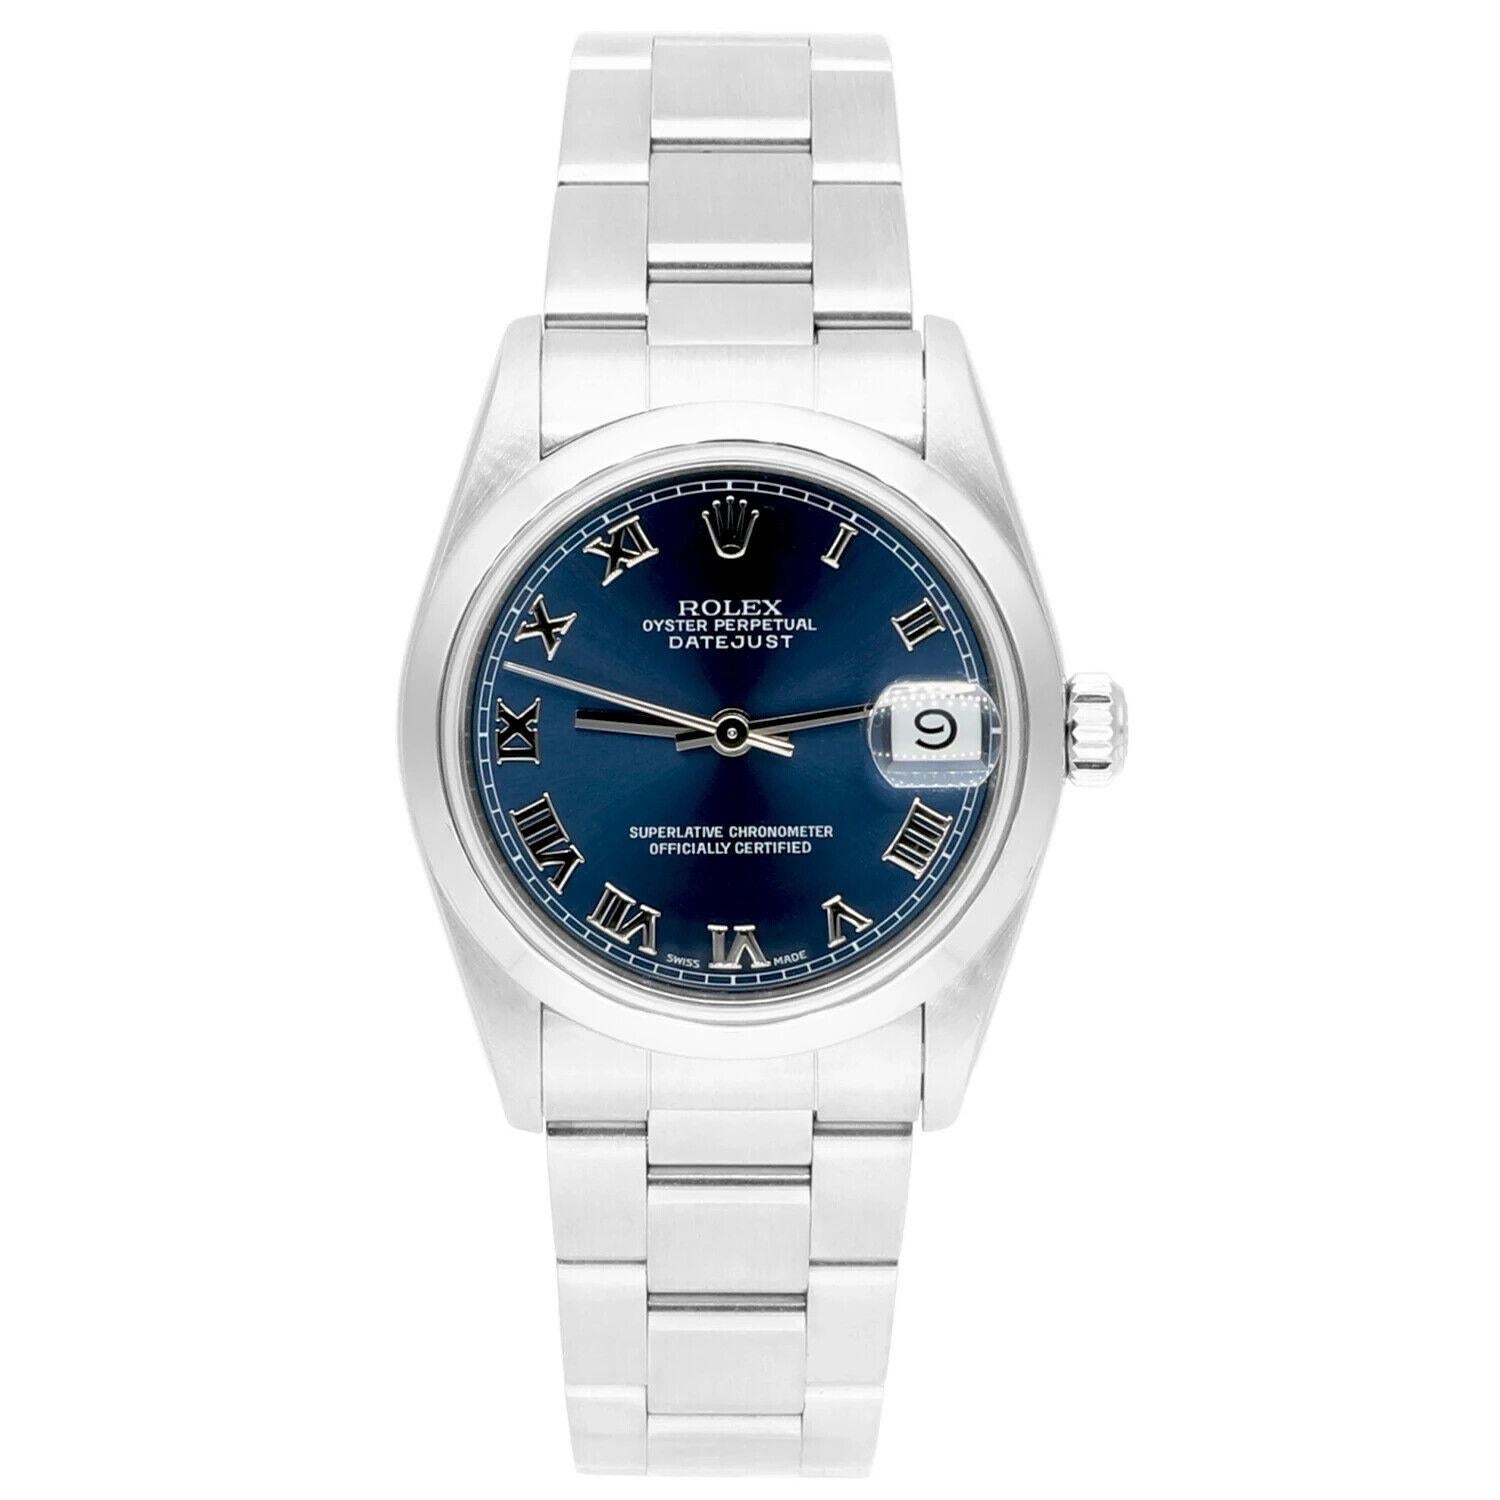 Silver-tone stainless steel case with a silver-tone stainless steel oyster bracelet. Fixed fluted silver-tone 18k white gold bezel. Blue dial with silver-tone hands and Roman numeral hour markers. Minute markers around the outer rim. Dial Type: